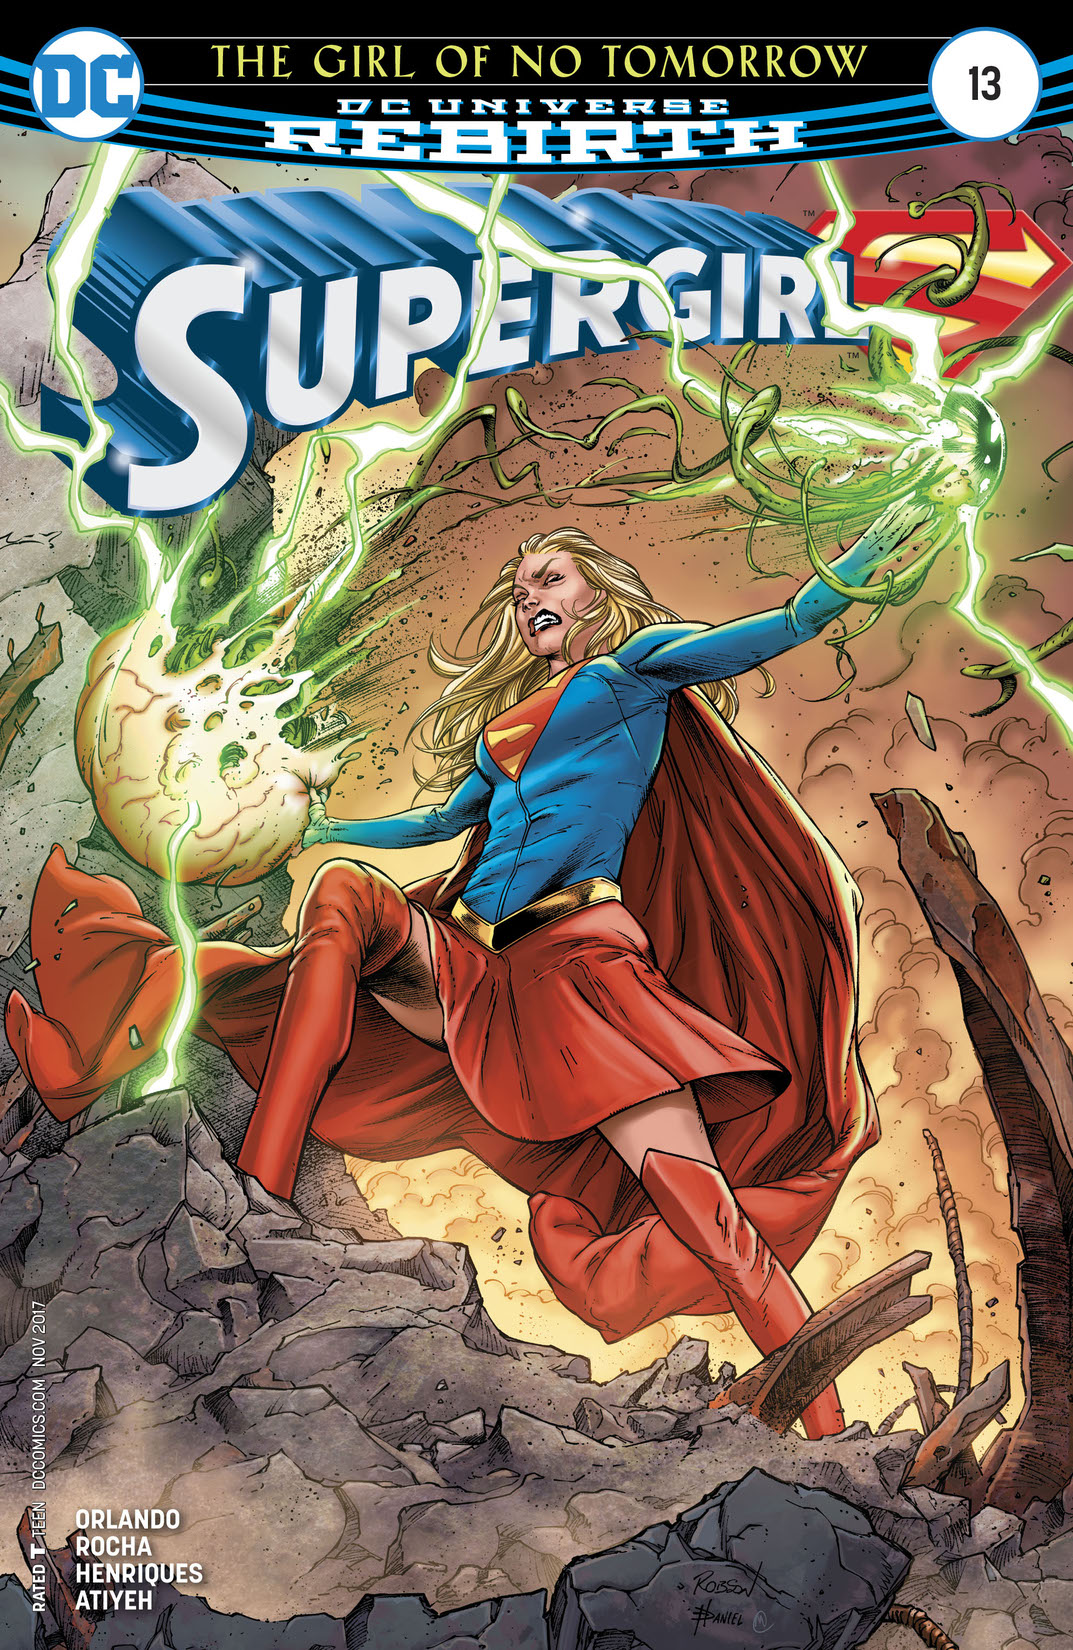 Supergirl (2016-) #13 preview images